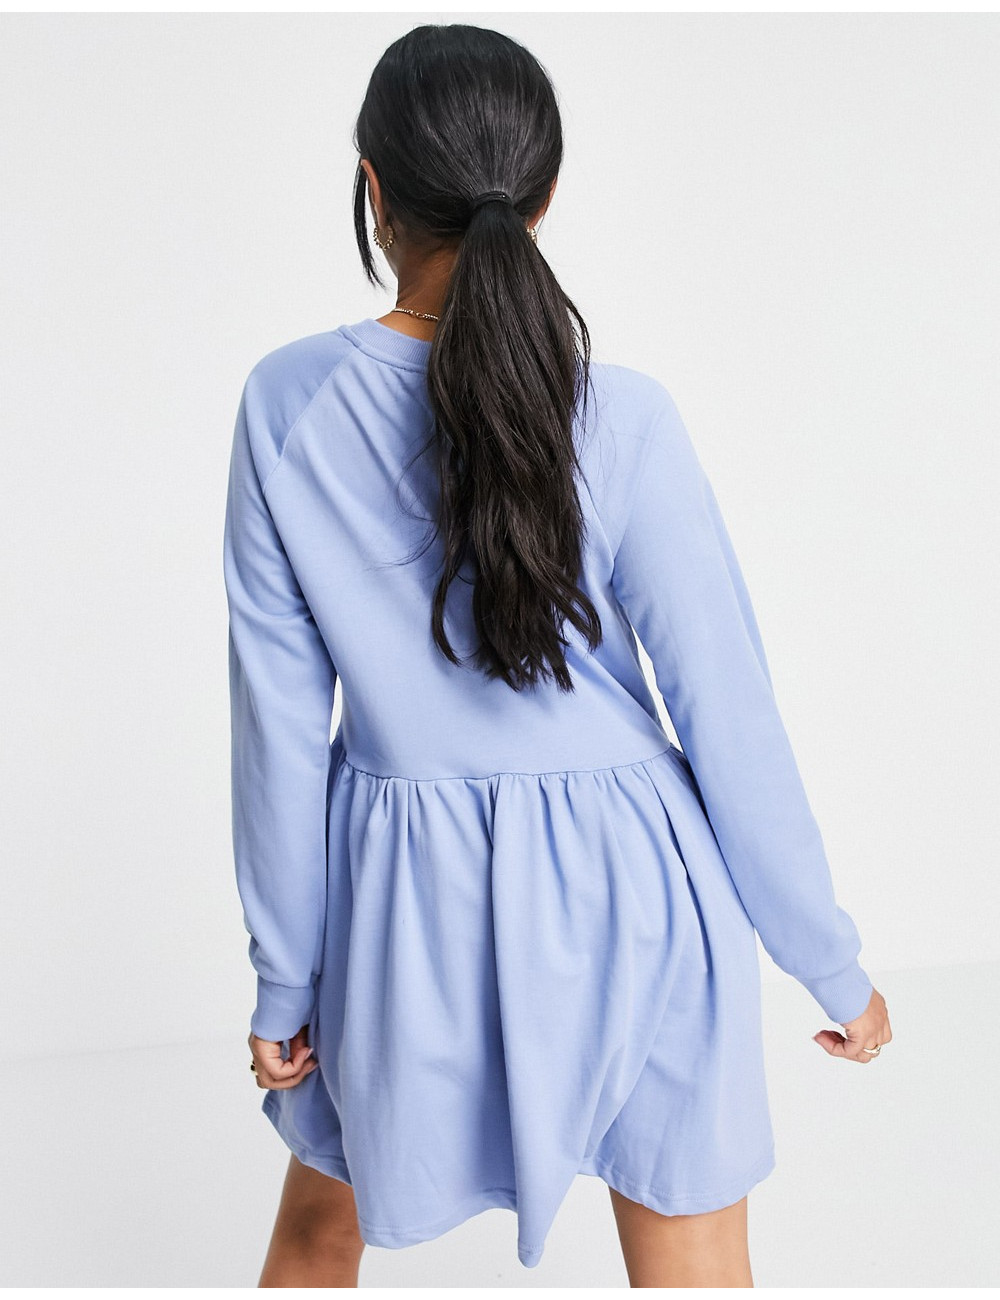 Missguided oversized smock...